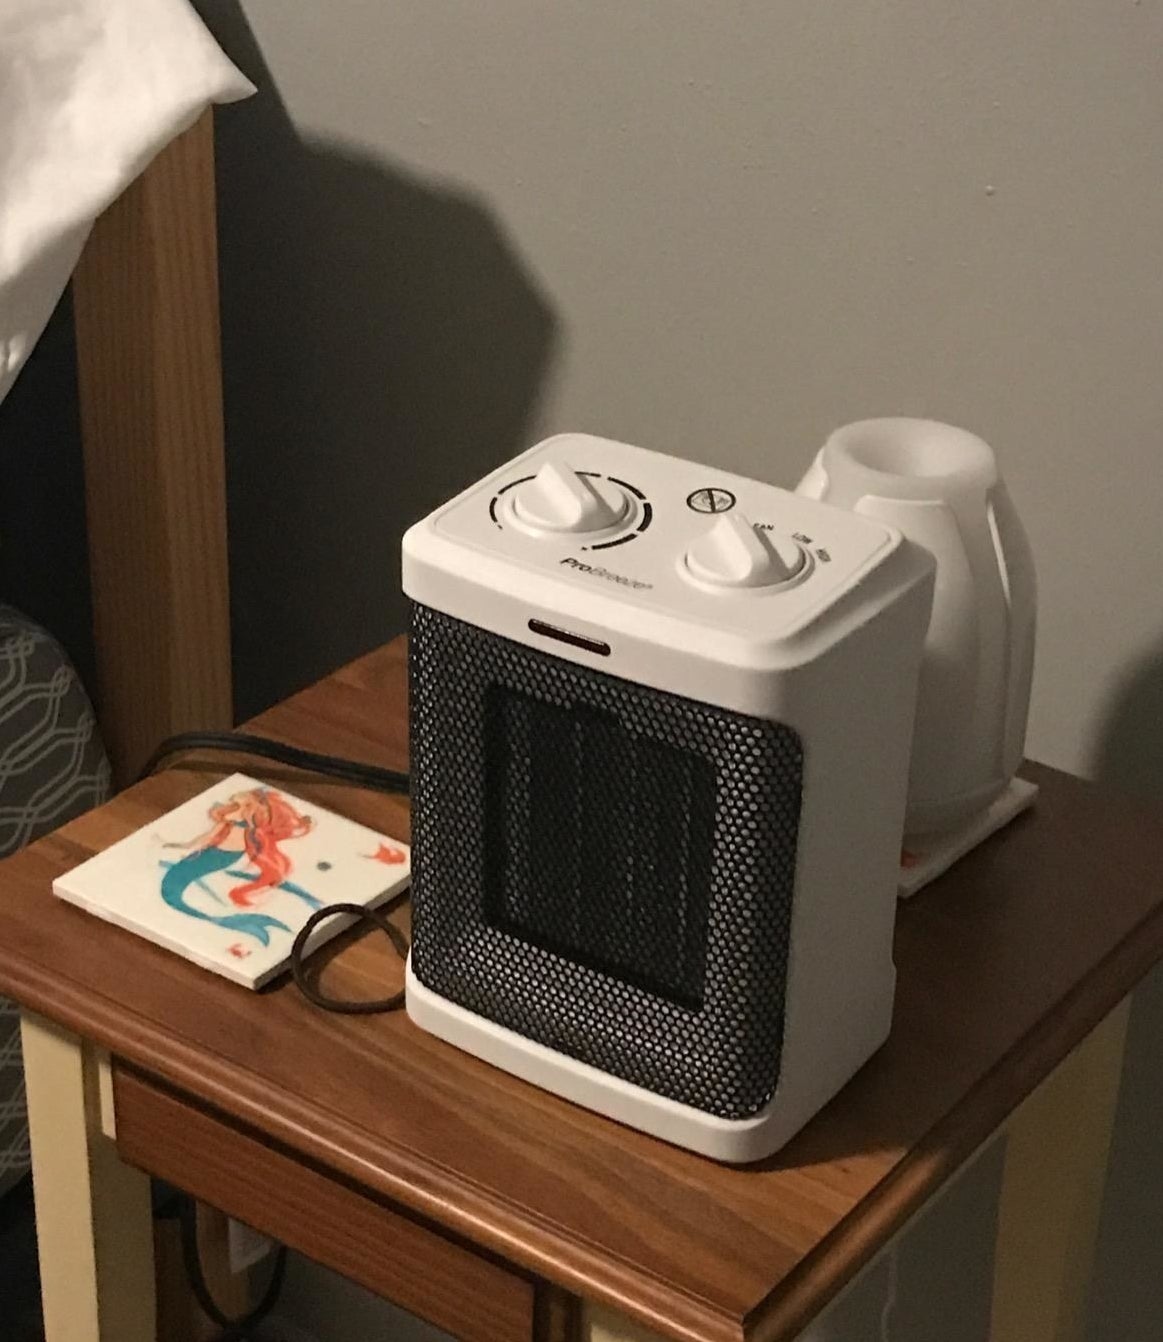 The space heater in white